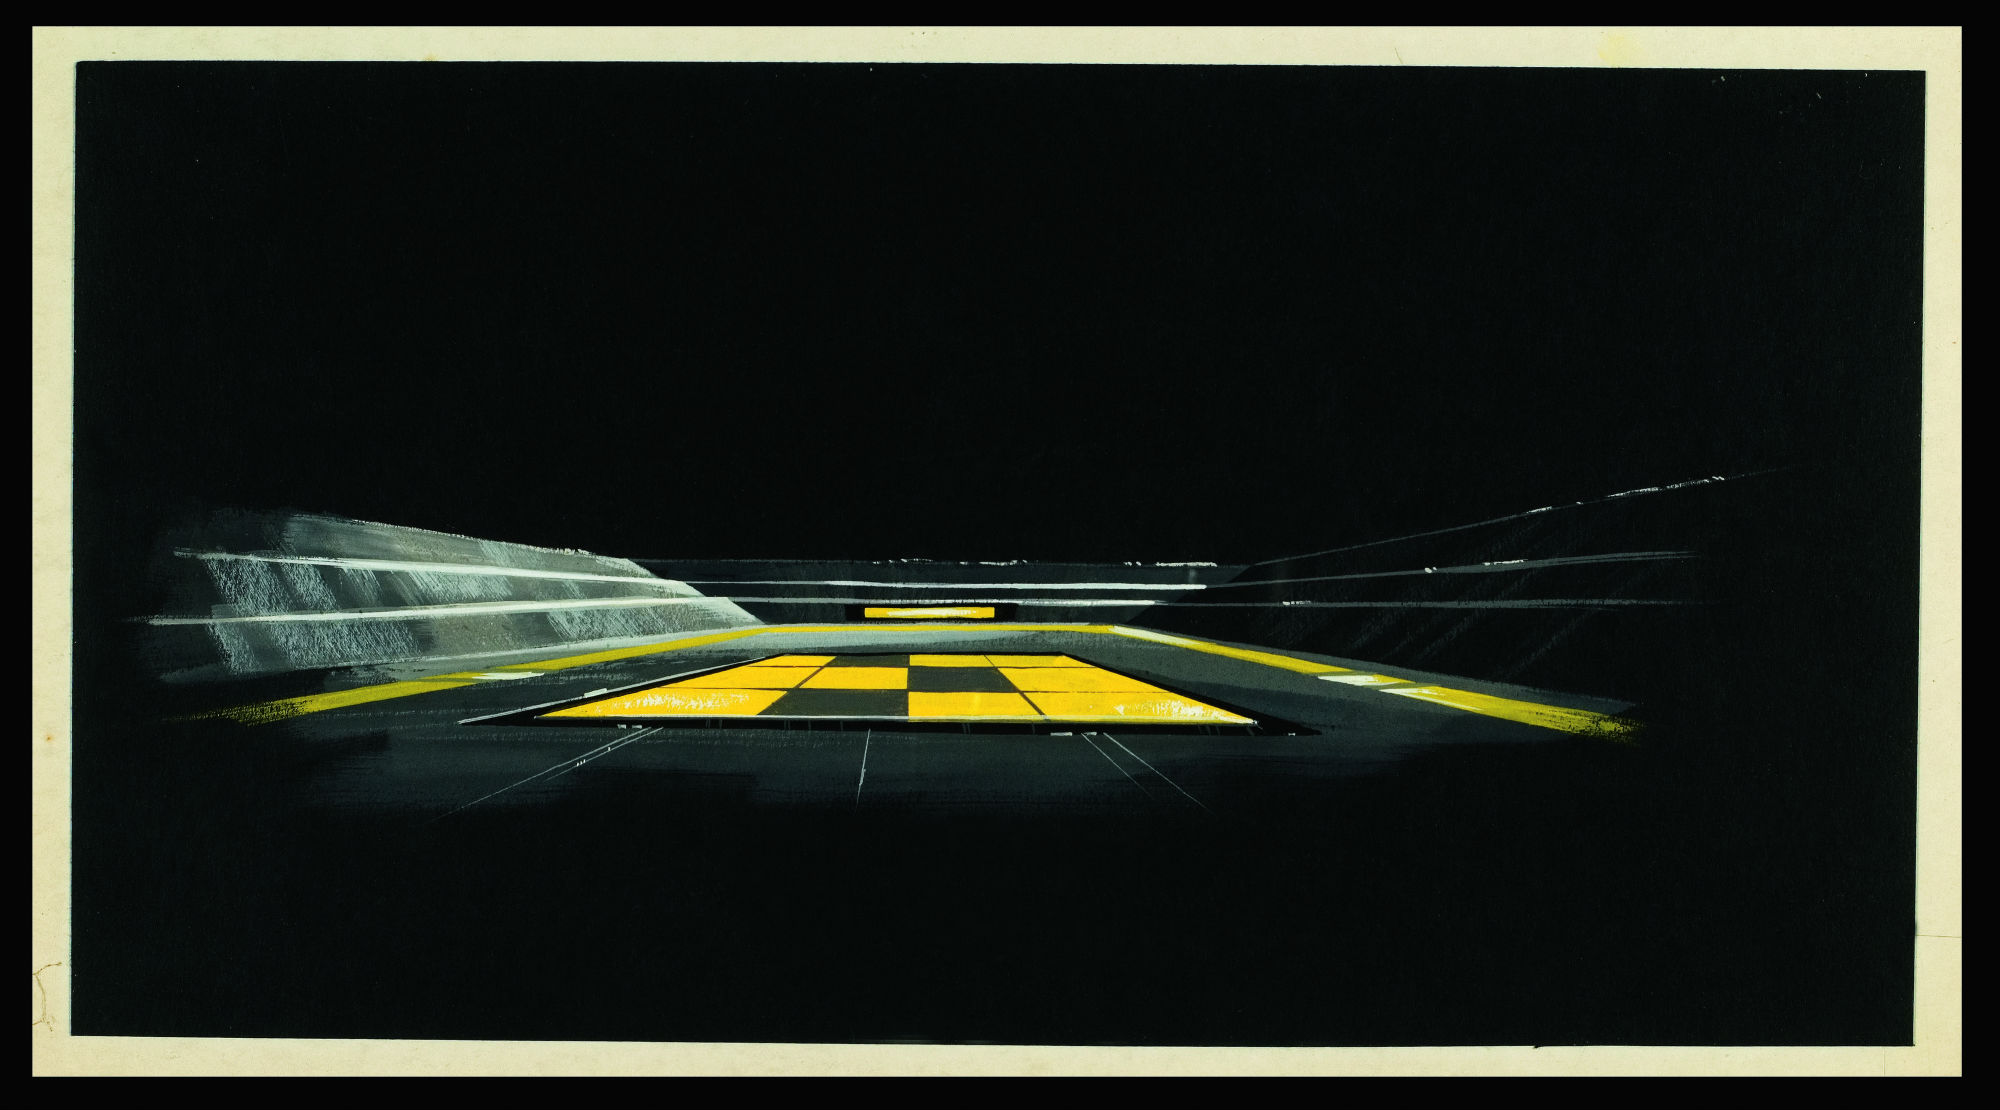 These Original Artworks From The Making Of 2001: A Space Odyssey Are Spectacular